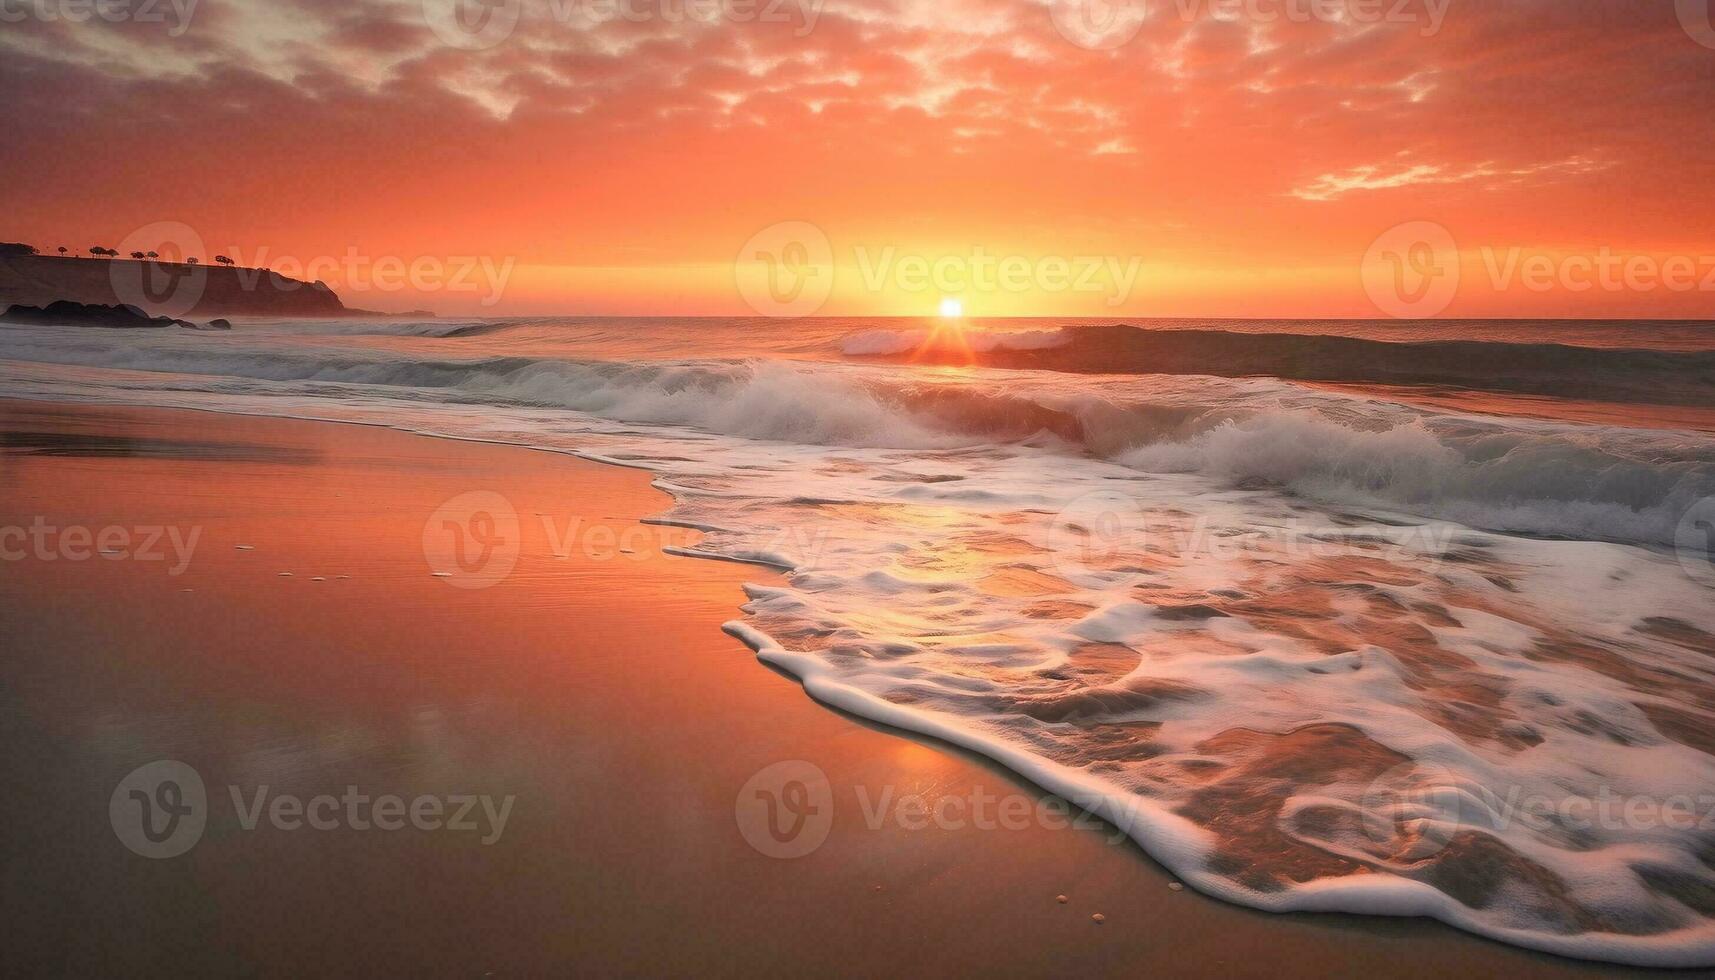 Sunrise on the beach with beautiful seascape view. Get away and holiday concept photo